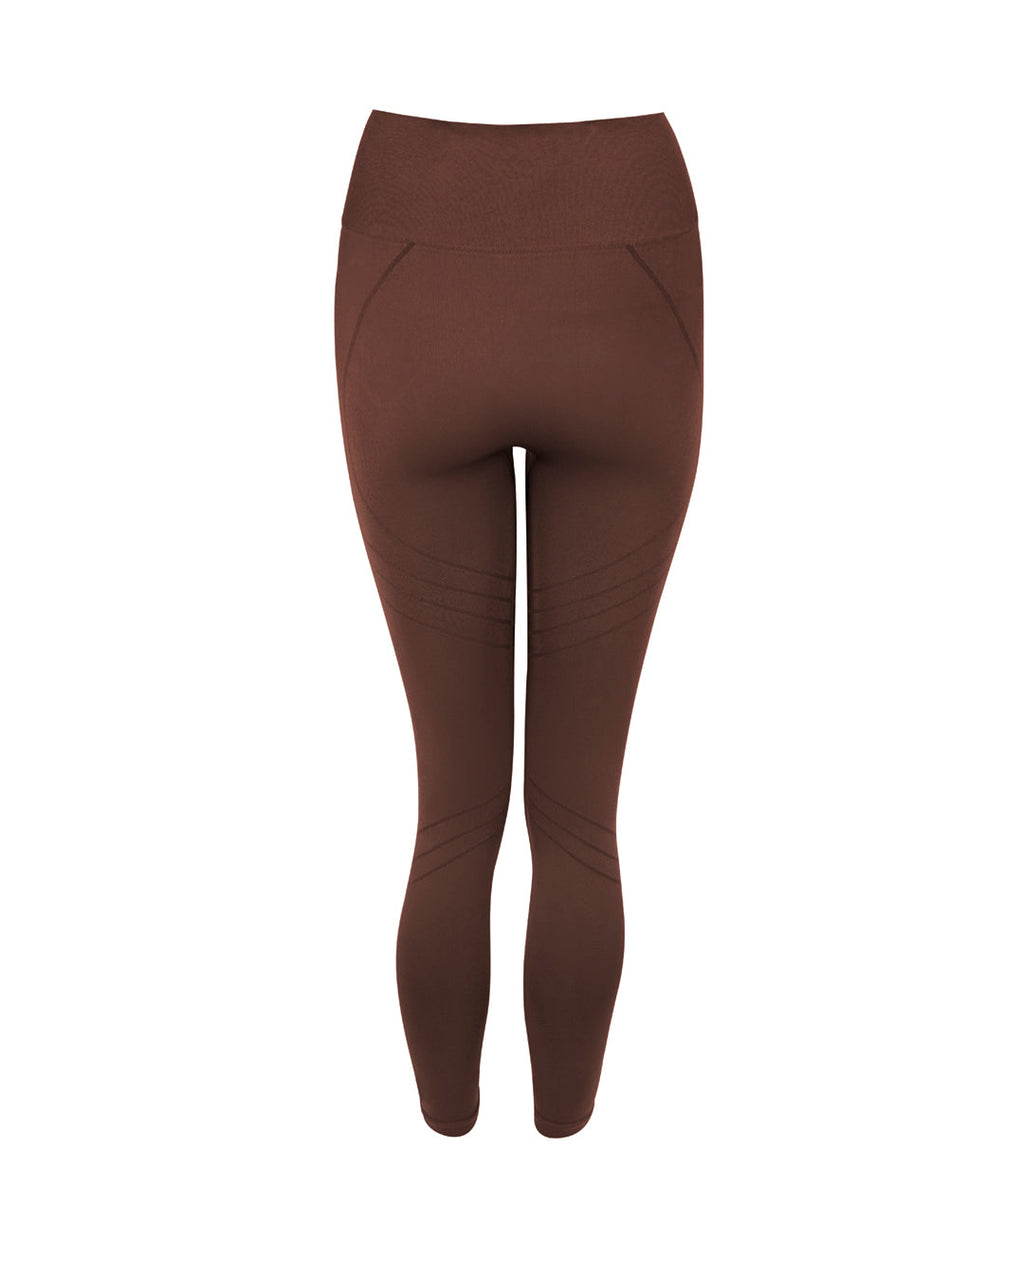 LUCID 7/8 Maroon Leggings, Stylish Gym Essential, Seamless & Supportive, Luxurious Brown Hue